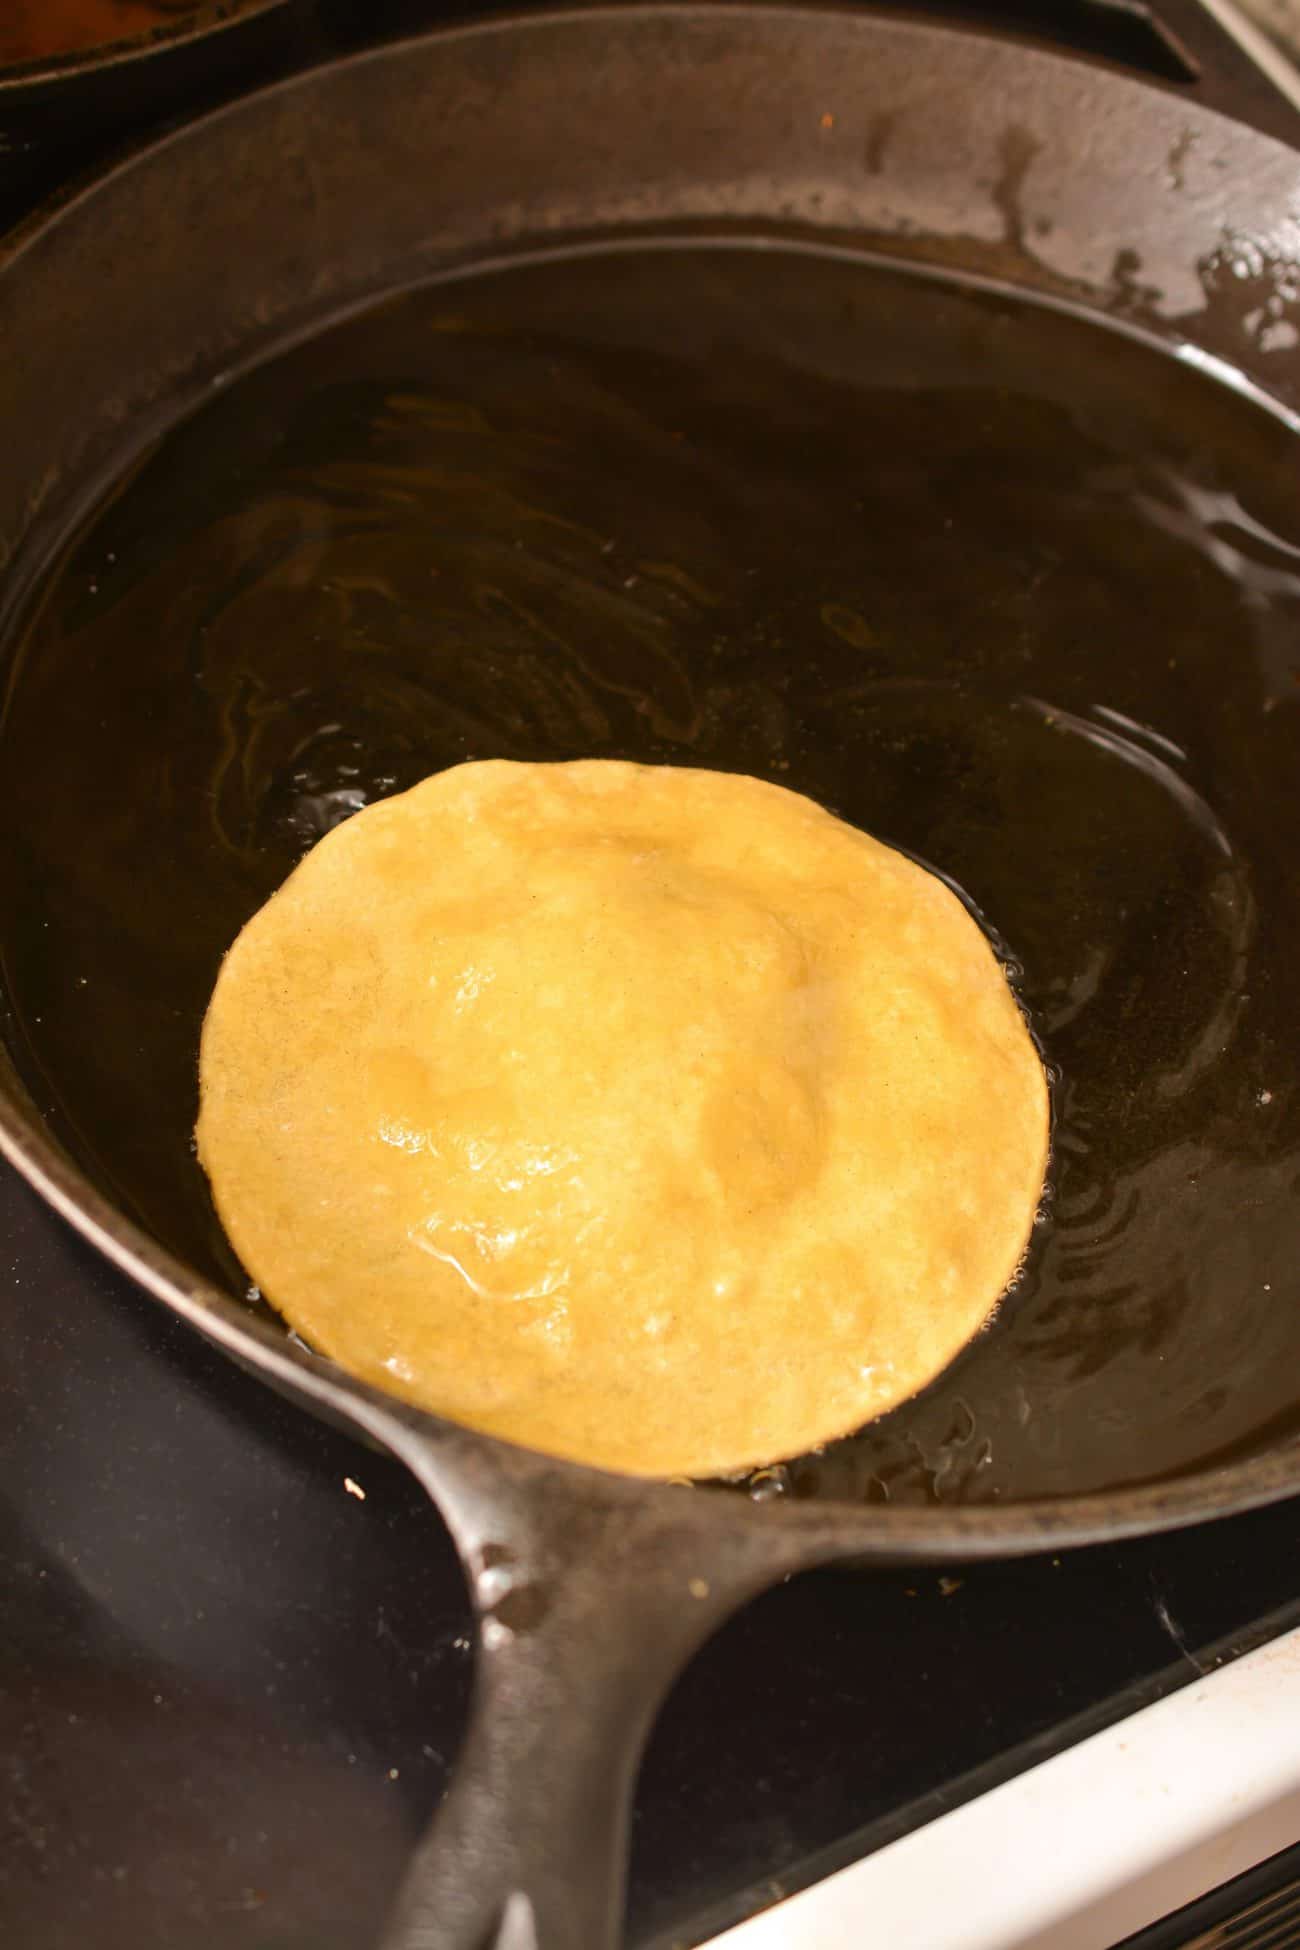 Heat the oil in a skillet over medium heat on the stove. Fry the tortillas for a minute or two on each side until golden, and then remove to drain on a paper towel-lined rack.